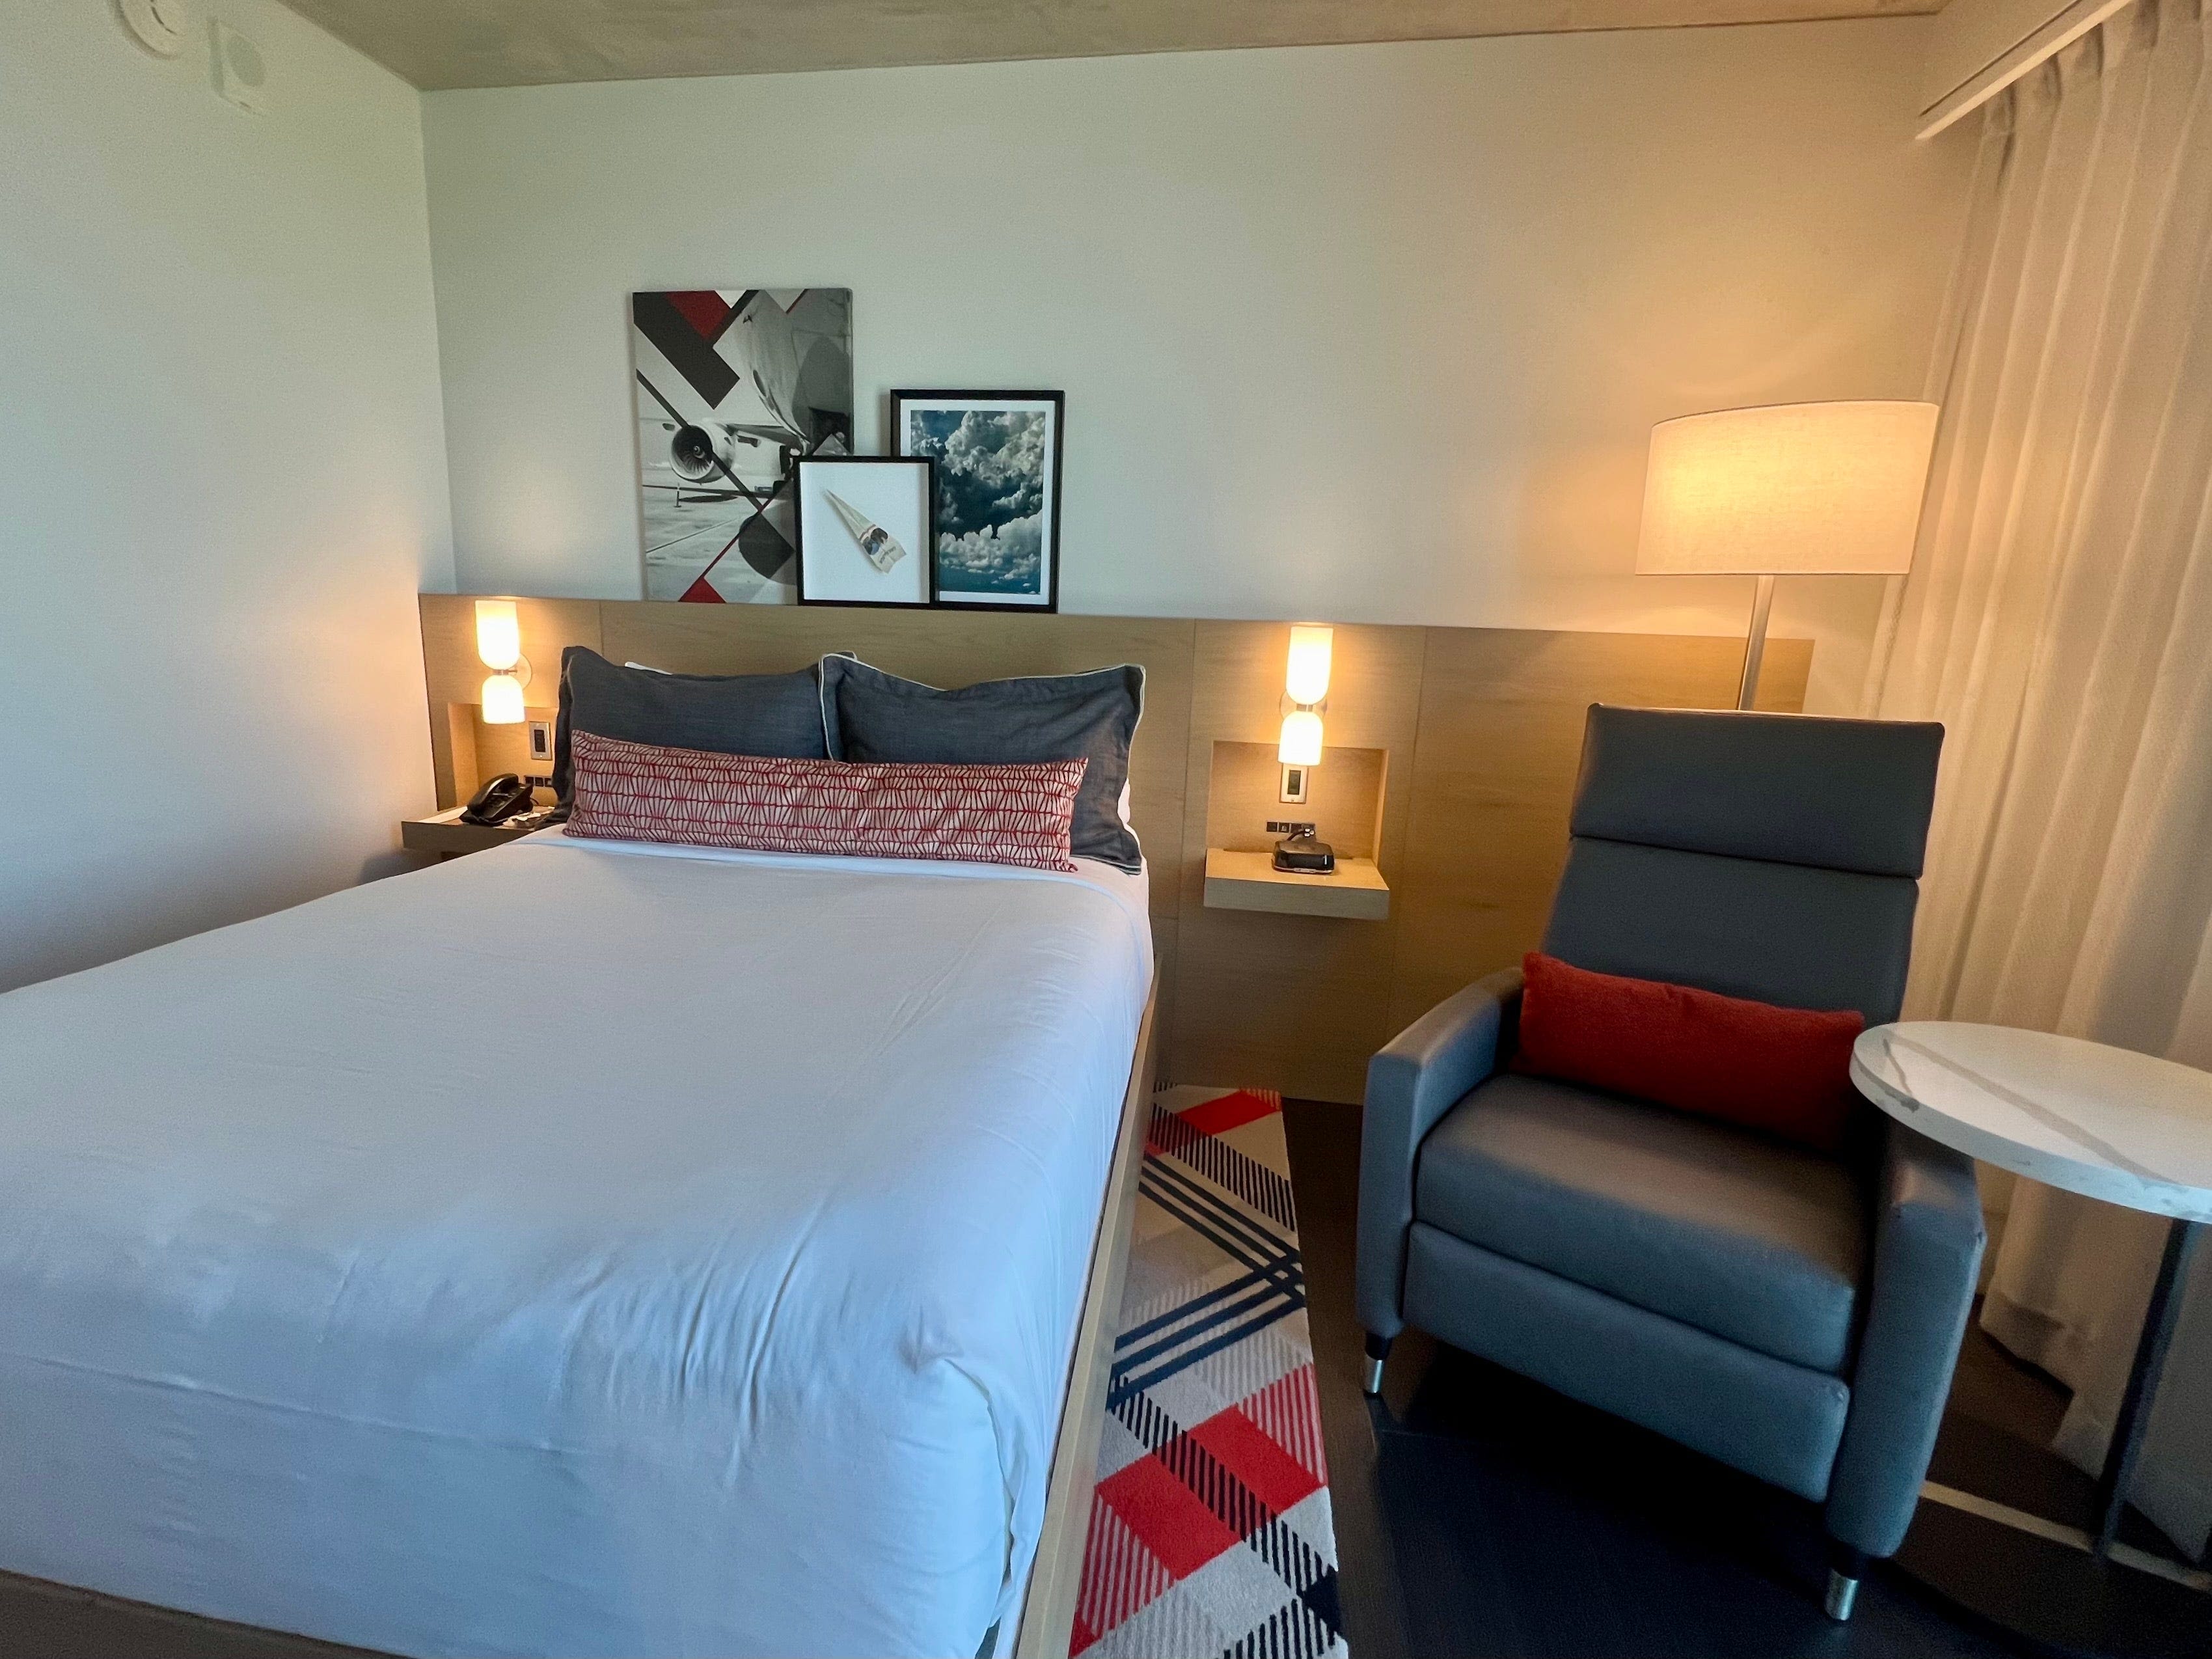 I toured American Airlines' 600-room, employees-only hotel with a pool and gym — see inside Skyview 6